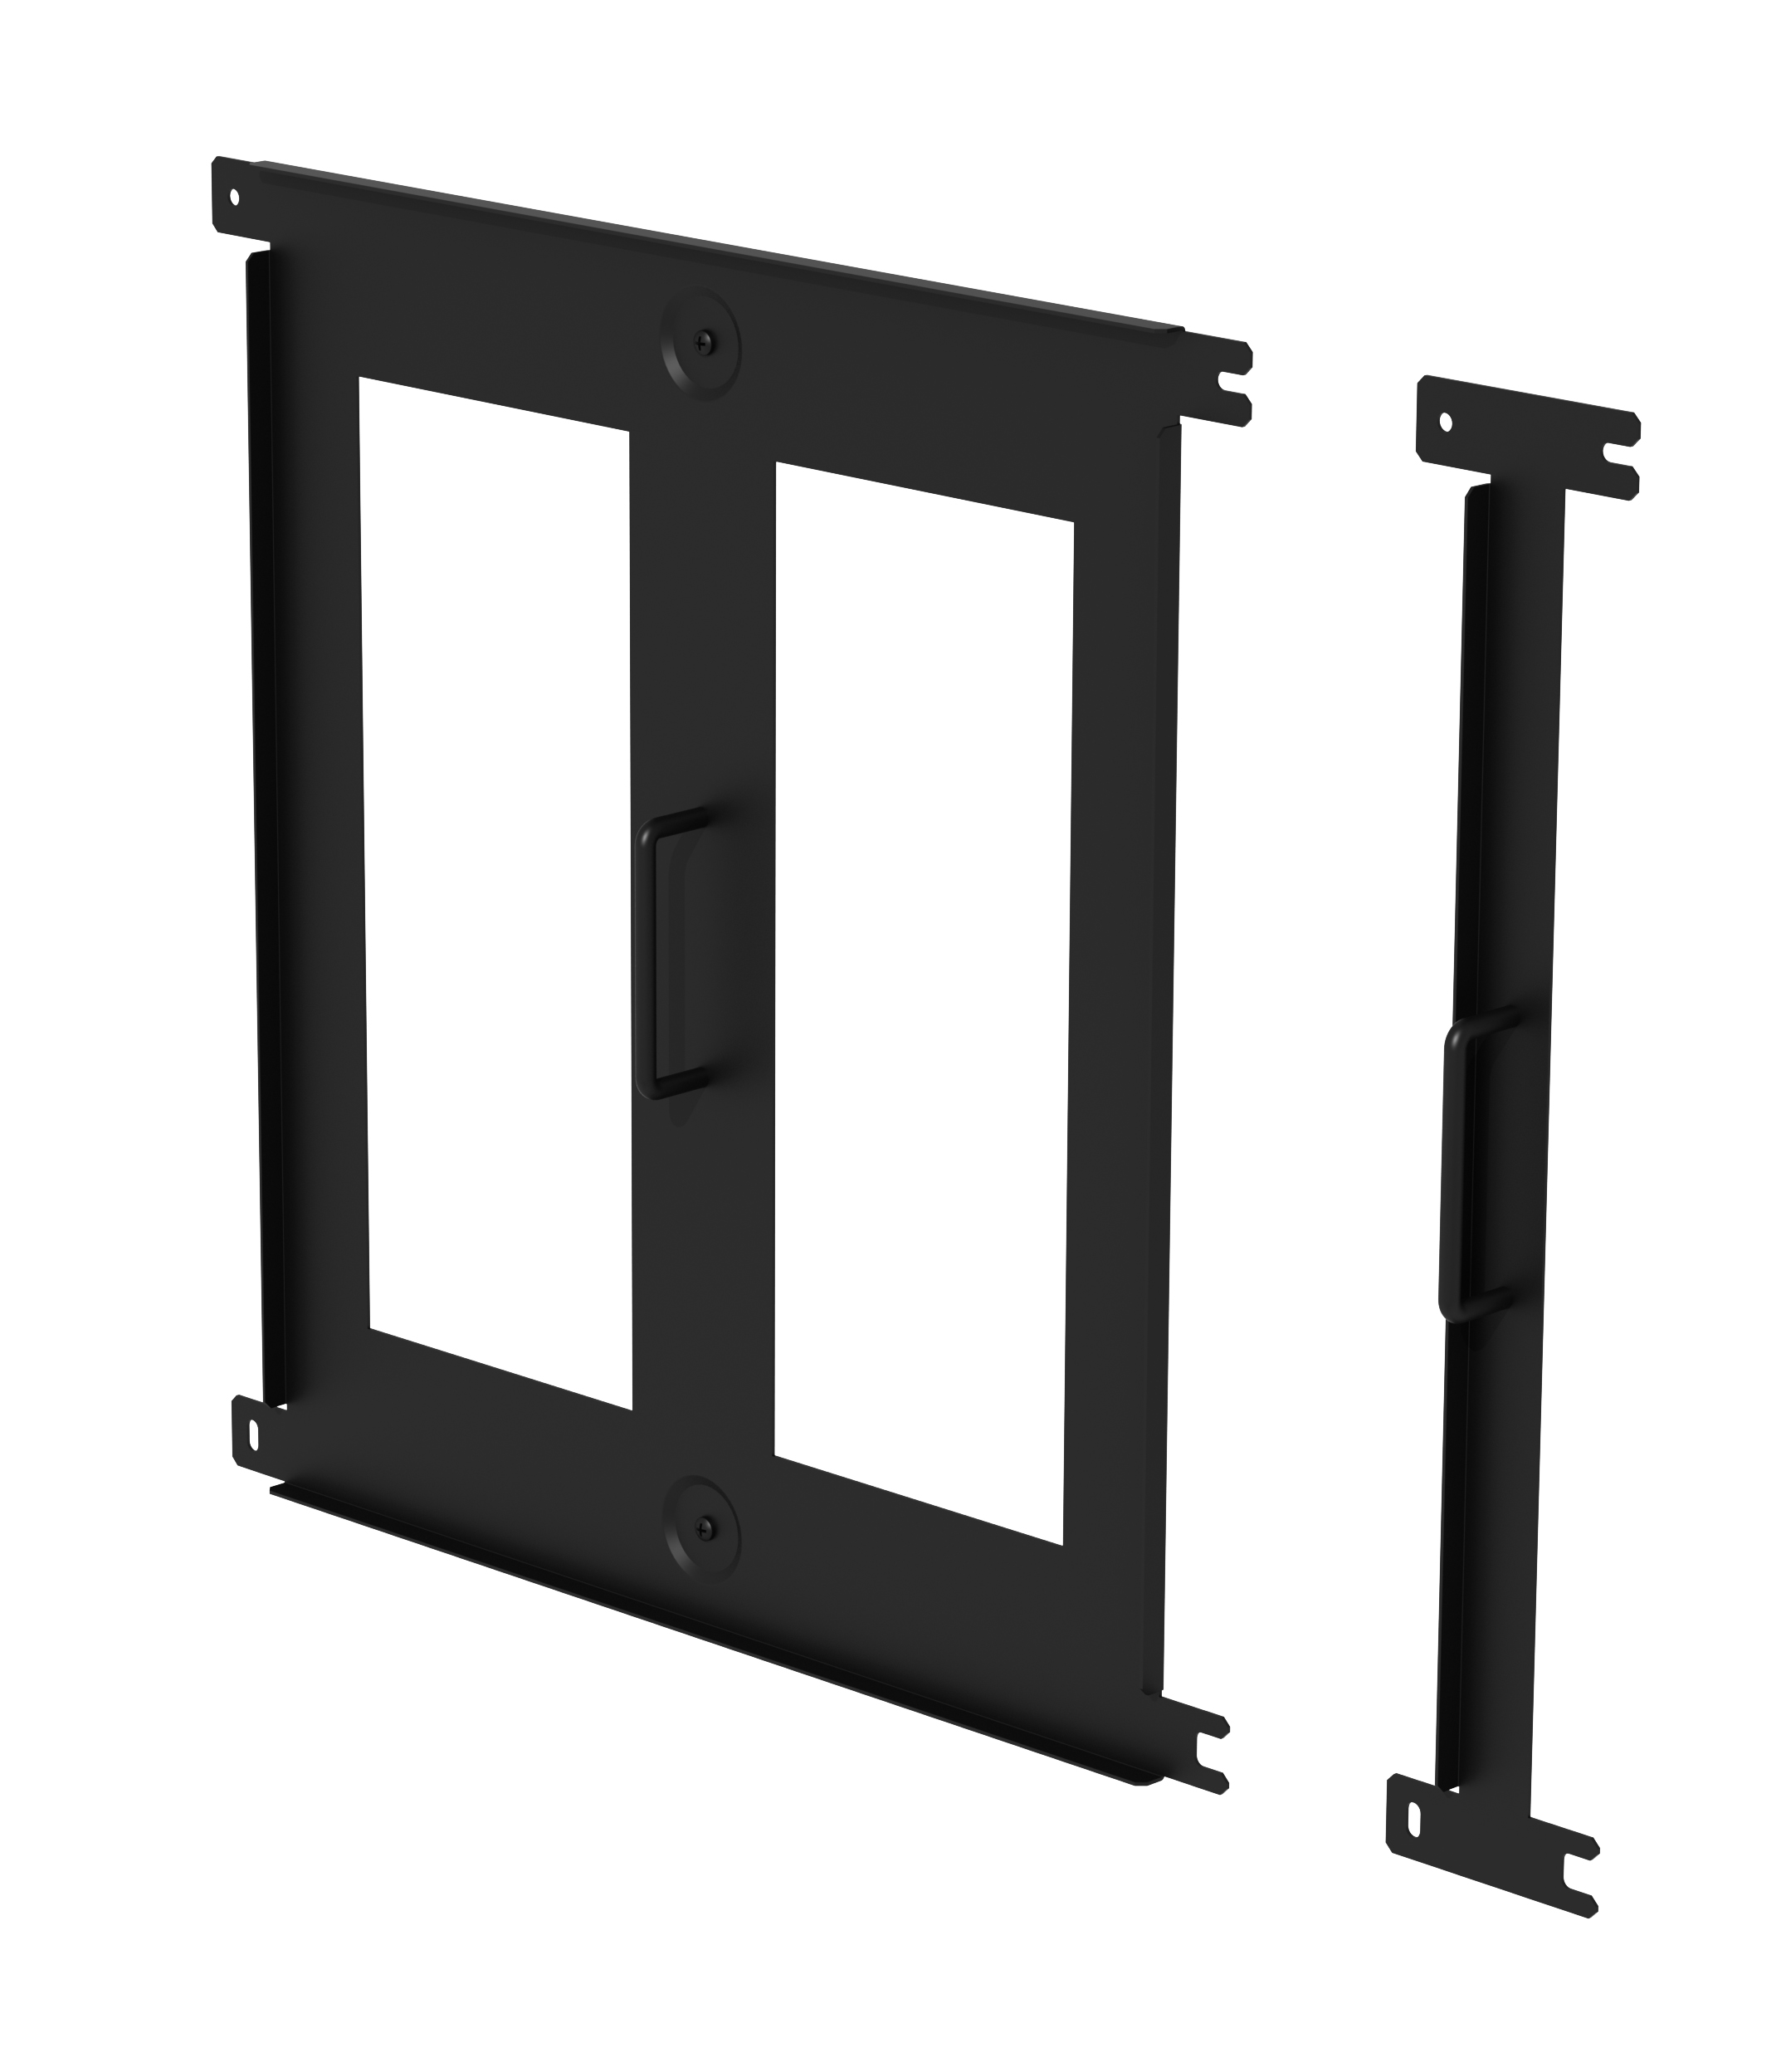 DS-VWRS029 Reusable Video Wall Spacer